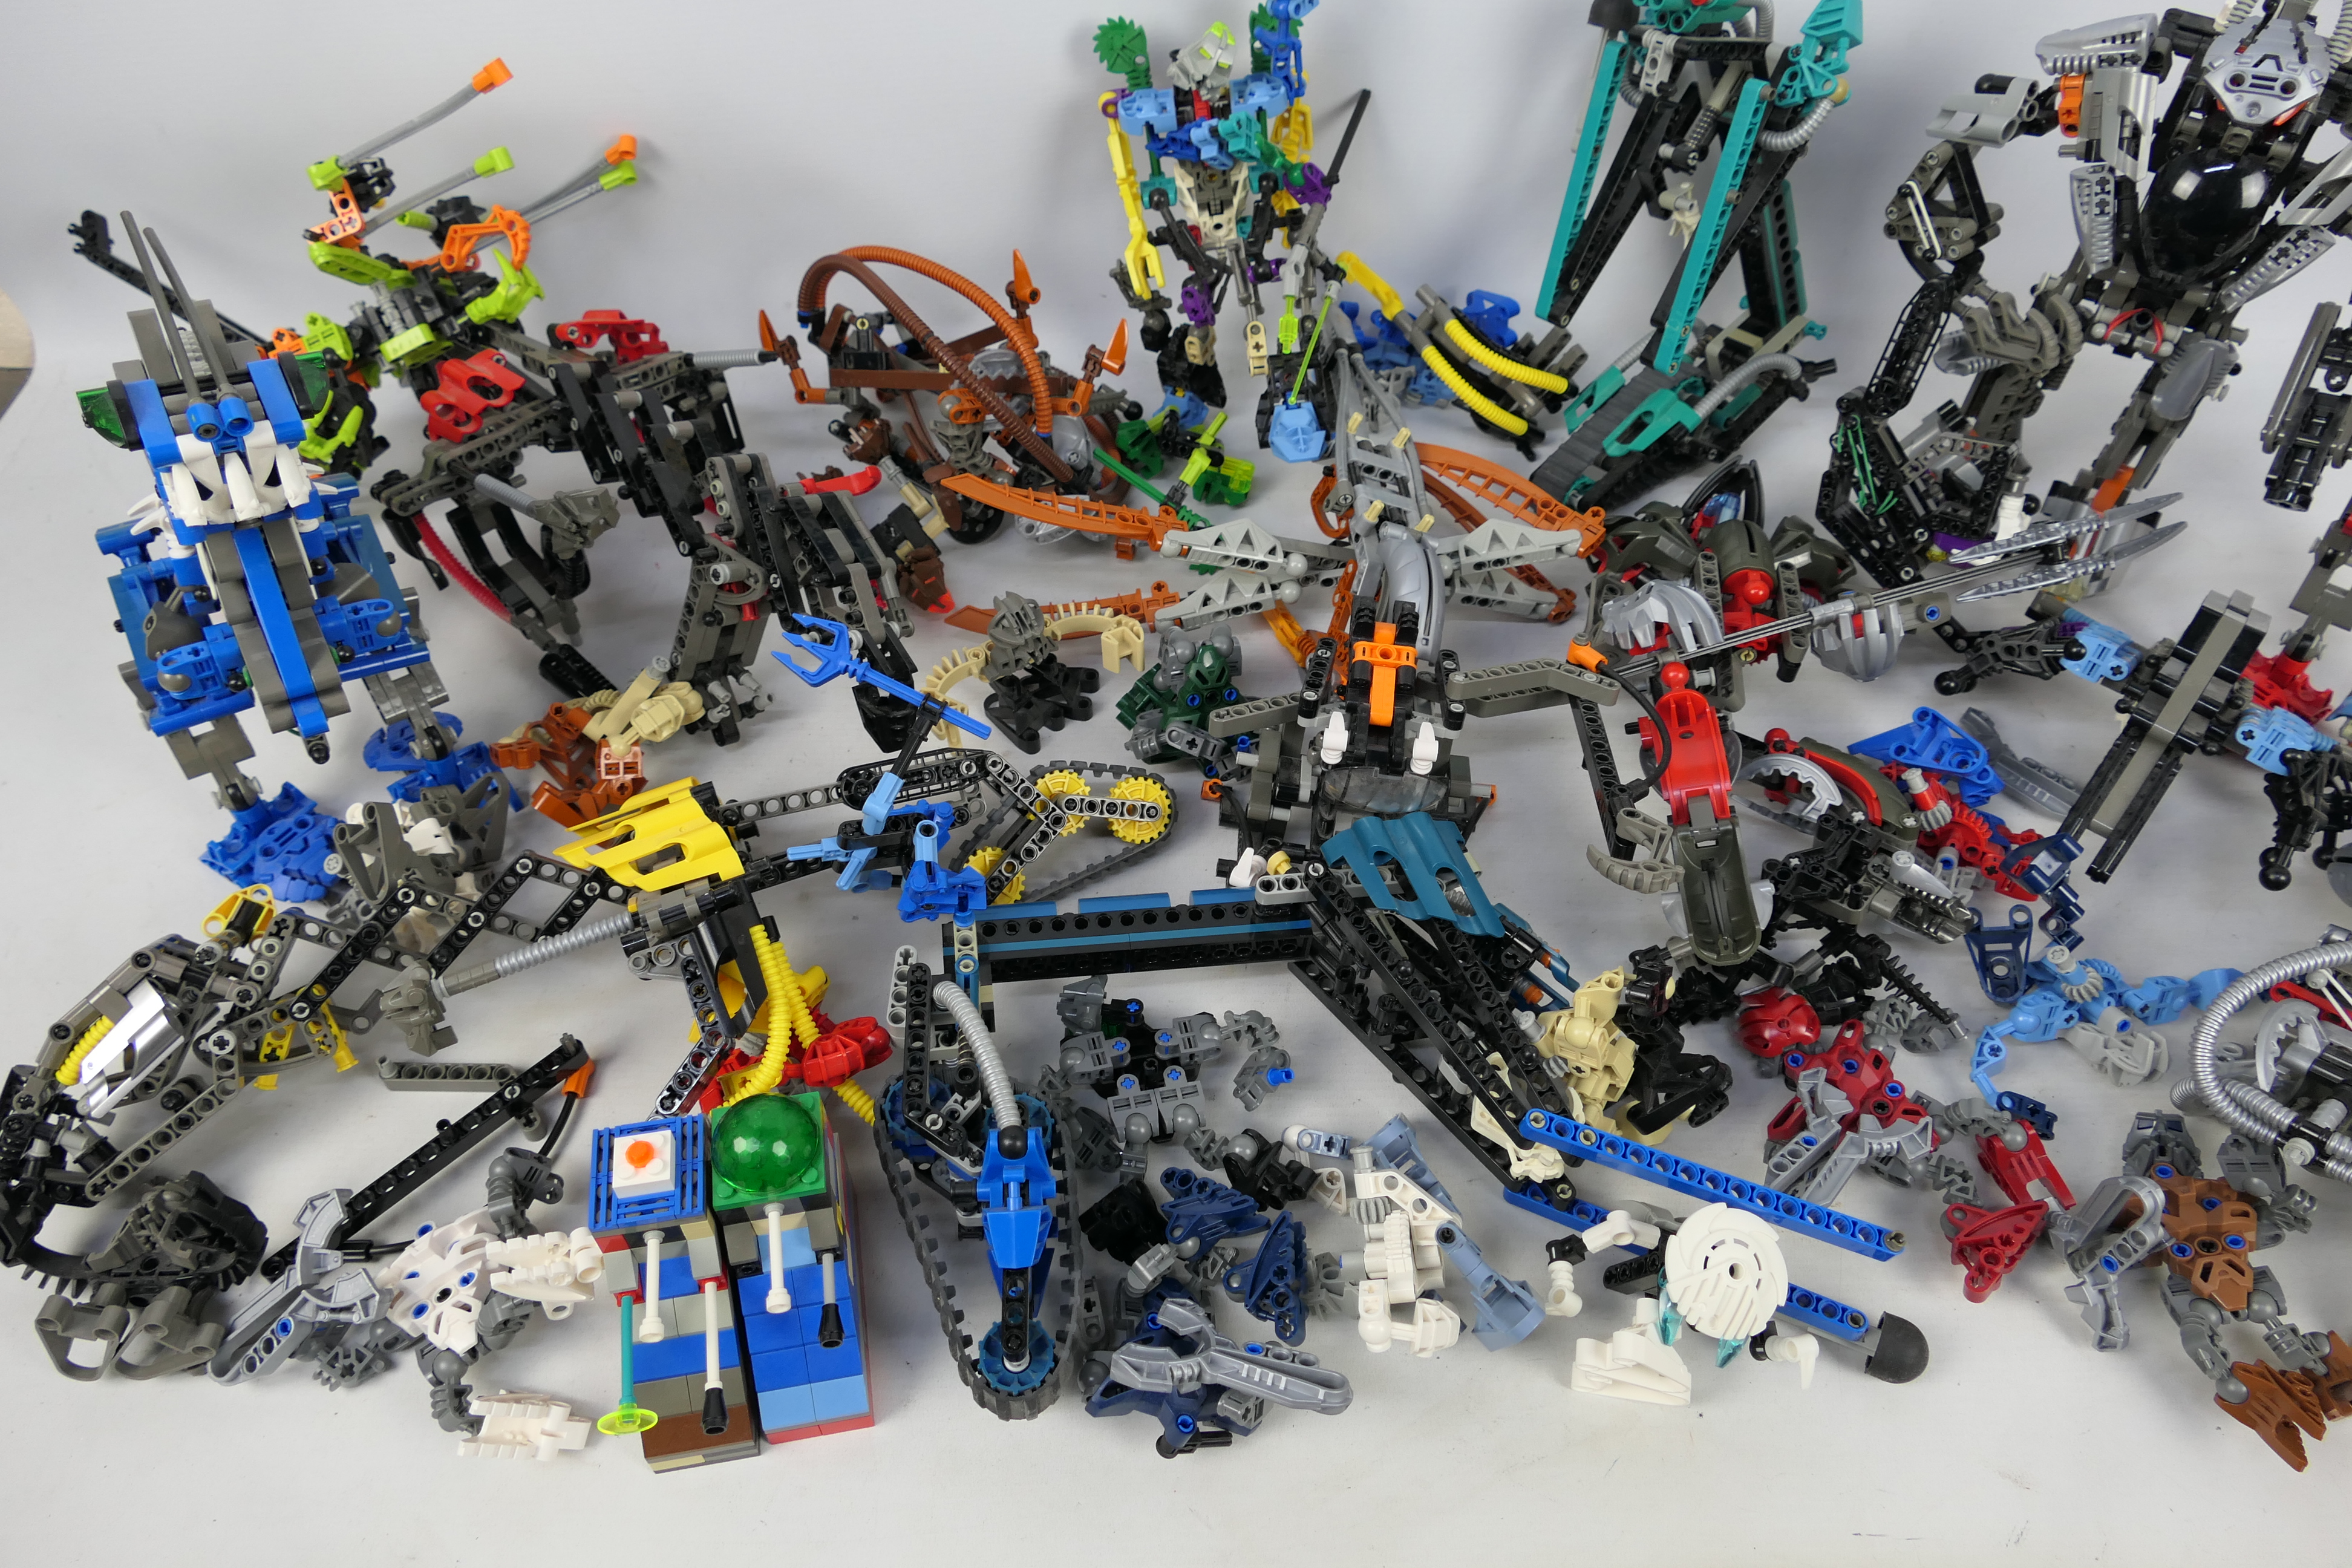 Lego - Bionicles - A collection of unboxed Lego including 15 x large Bionicle figures, - Image 2 of 7